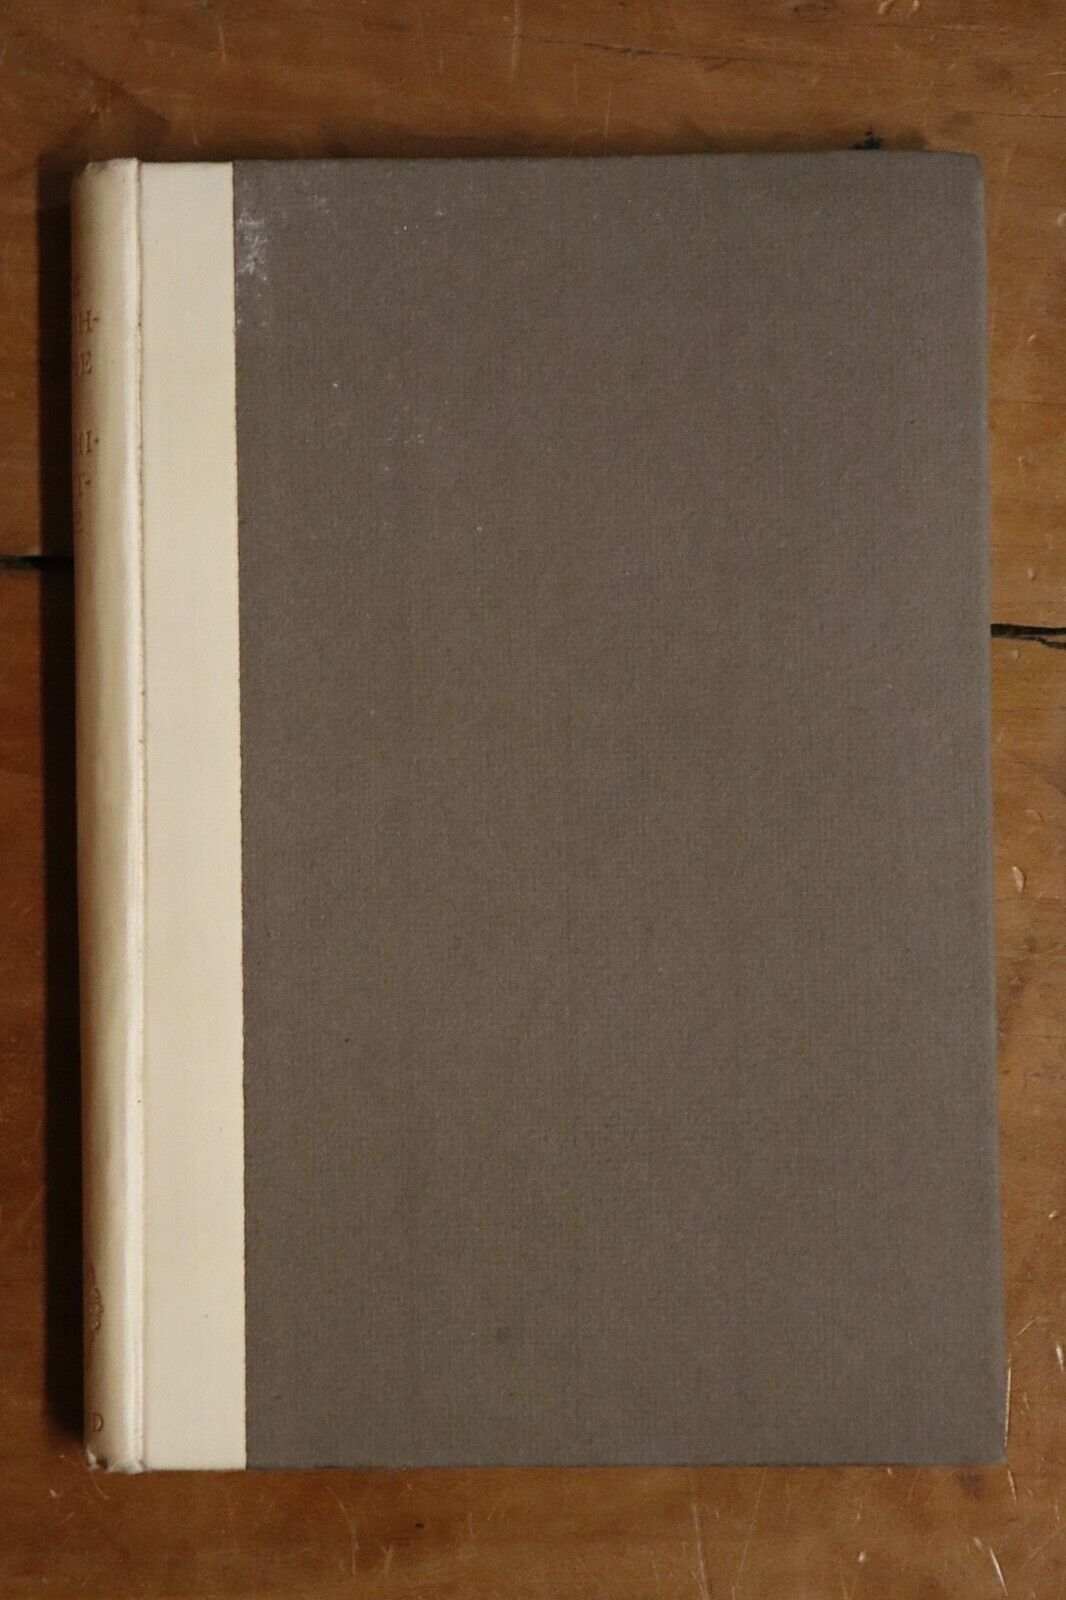 1925 The Touchstone Of Architecture by R Blomfield 1st Edition Antique Book